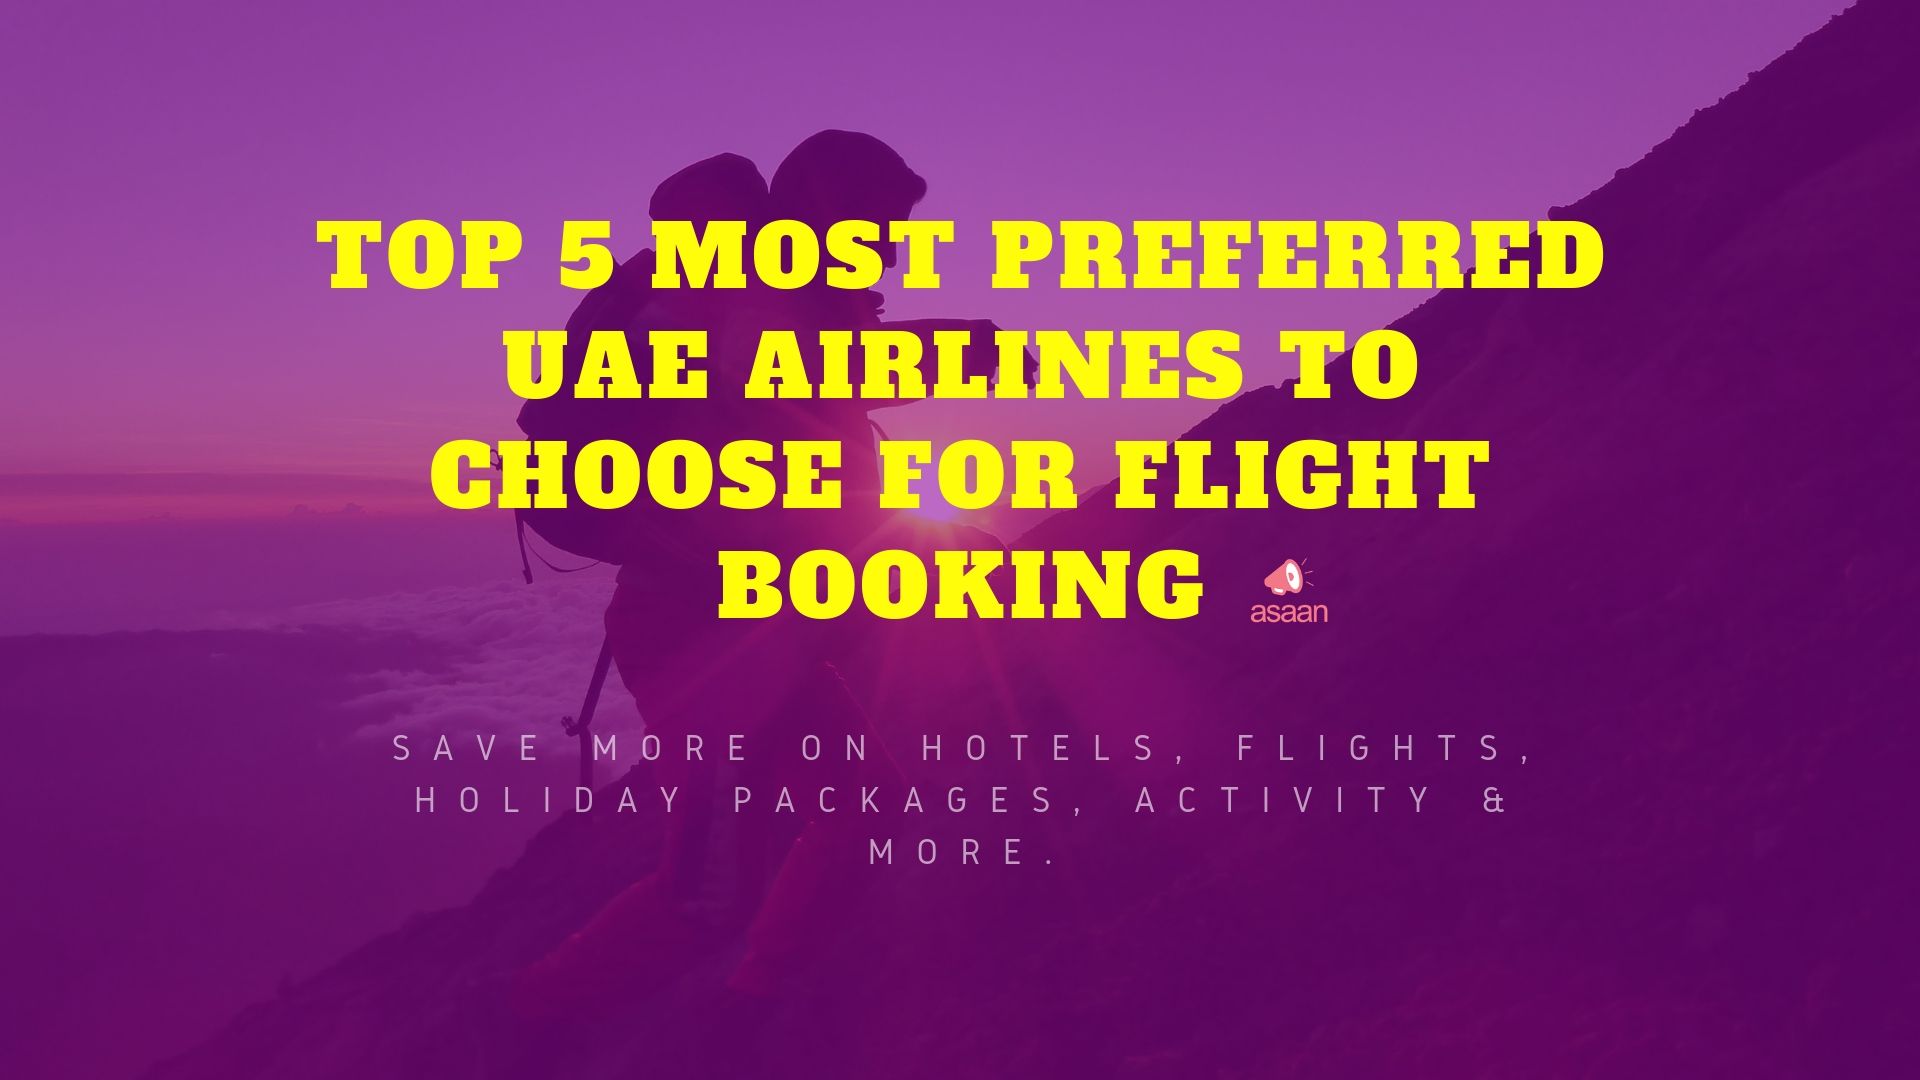 TOP 5 MOST PREFERRED UAE AIRLINES TO CHOOSE FOR FLIGHT BOOKING